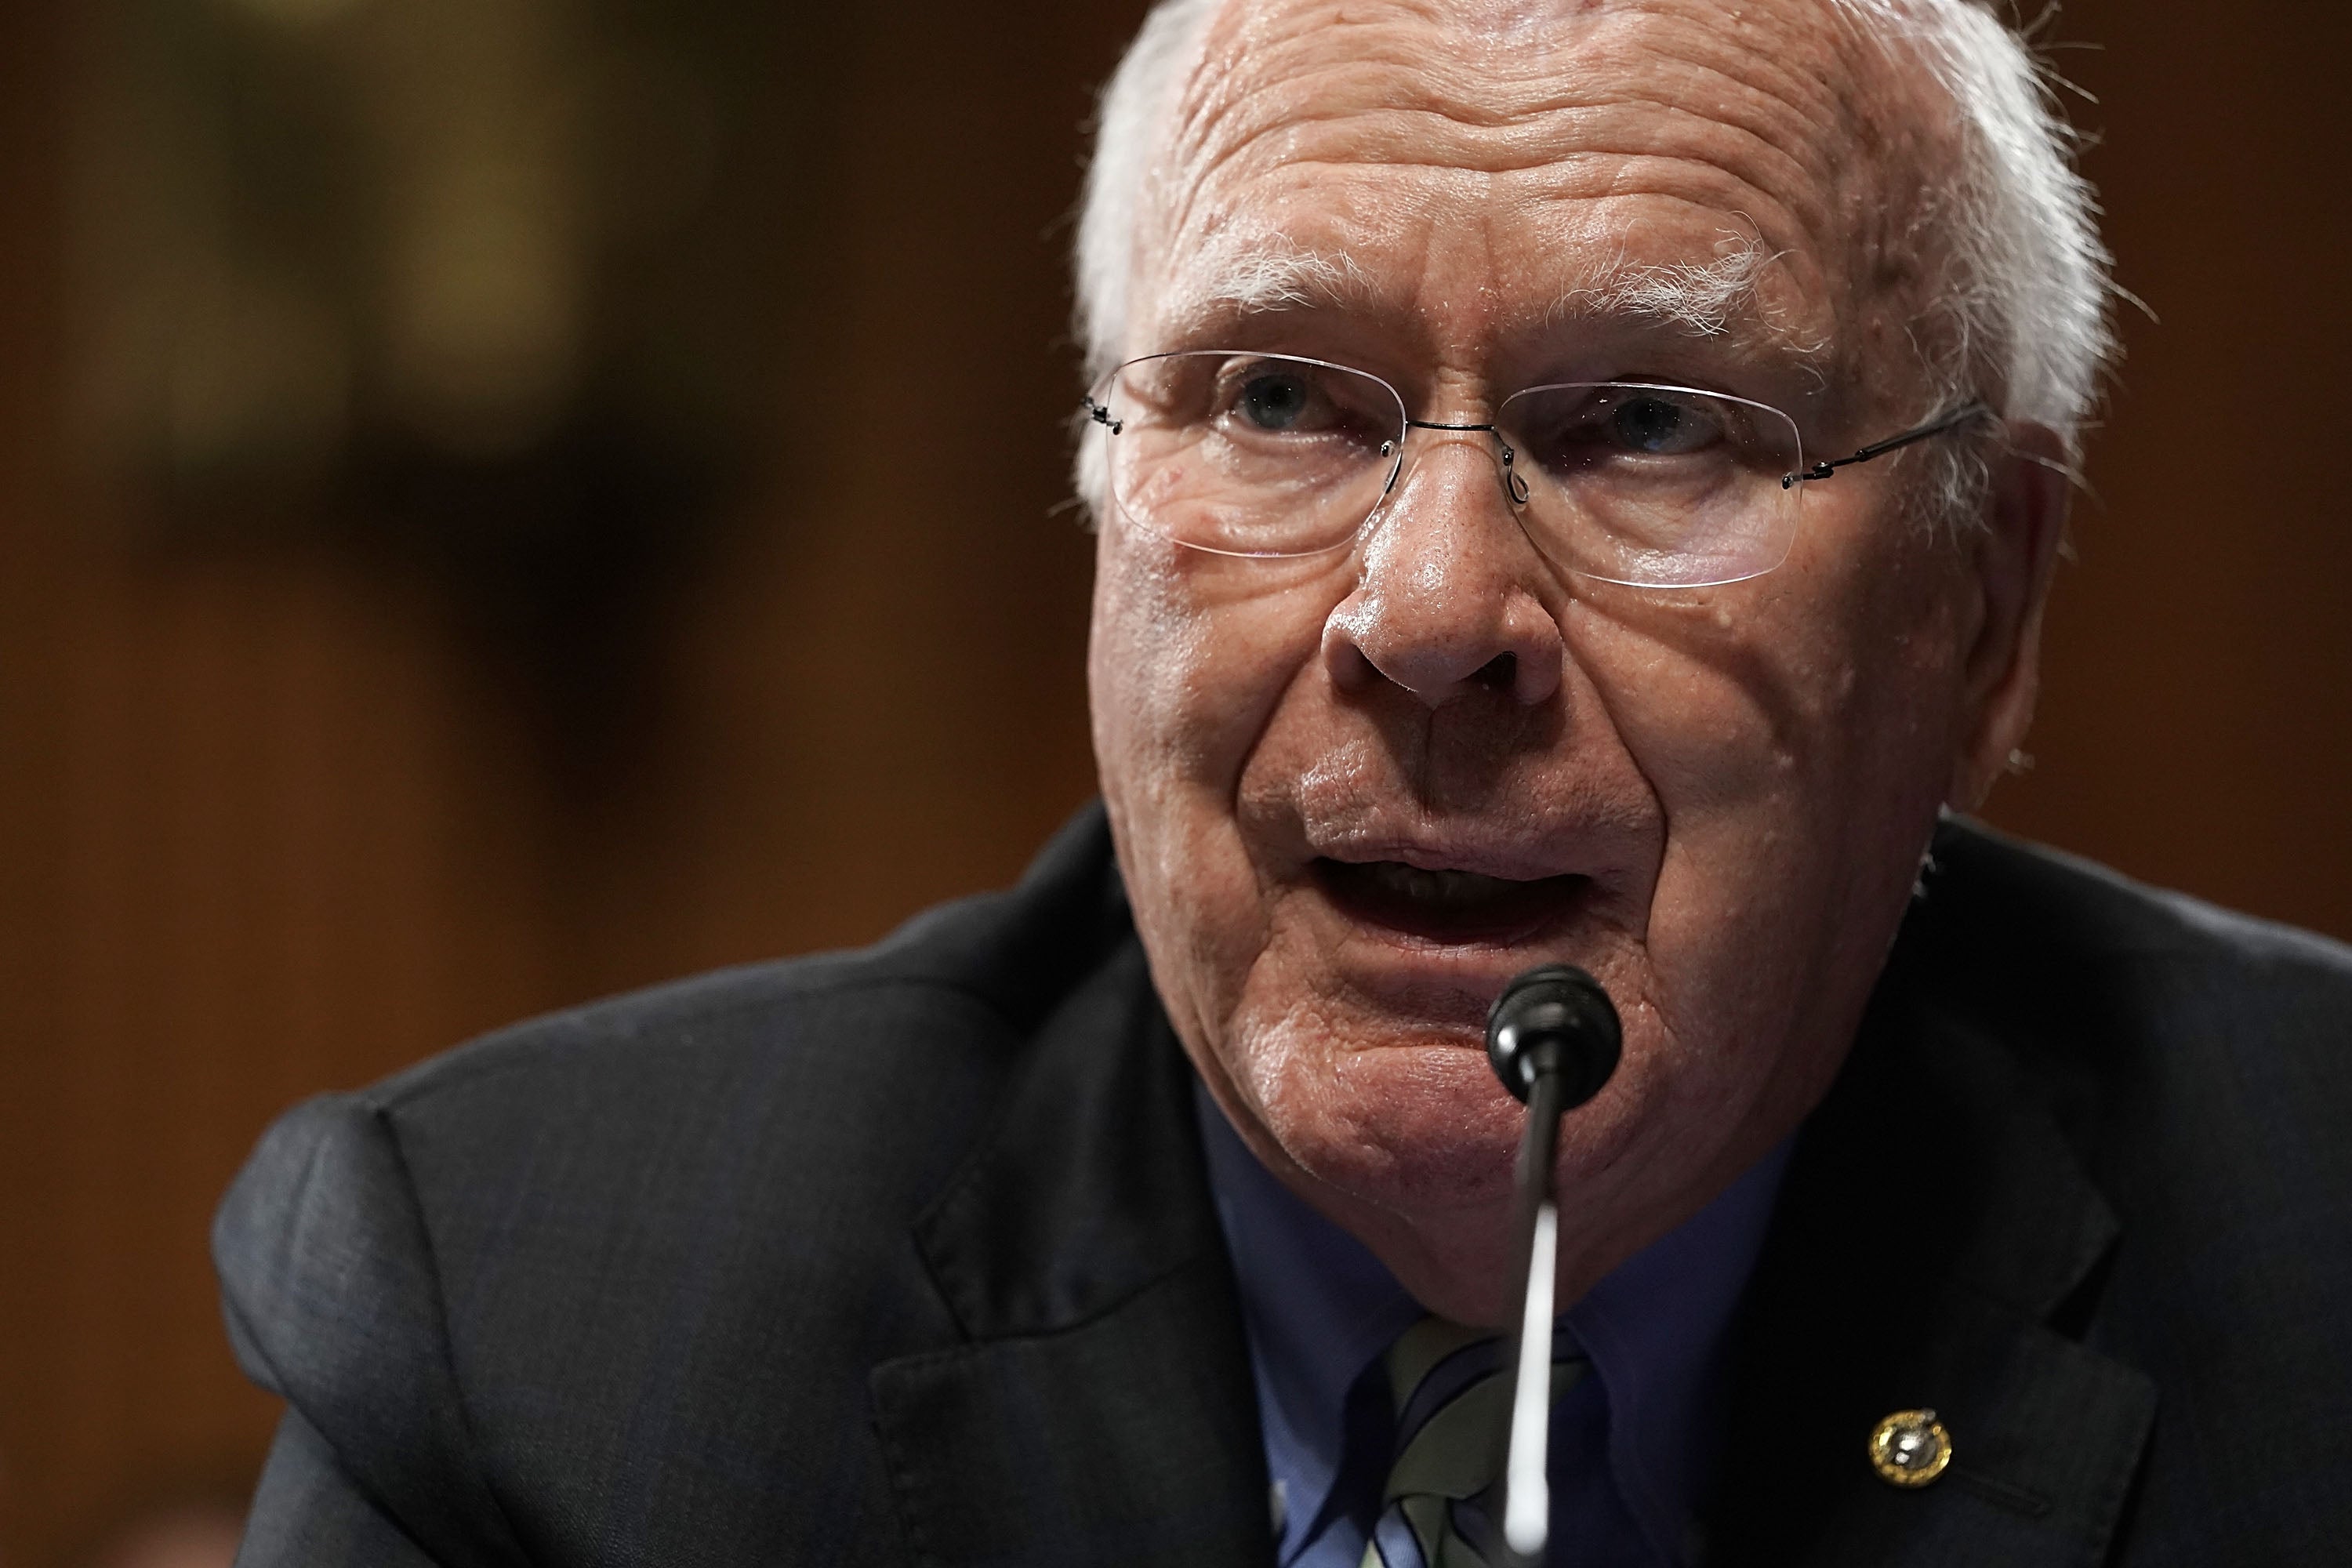 Patrick Leahy, a former senator, said the US is violating its own law by sending aid to Israel